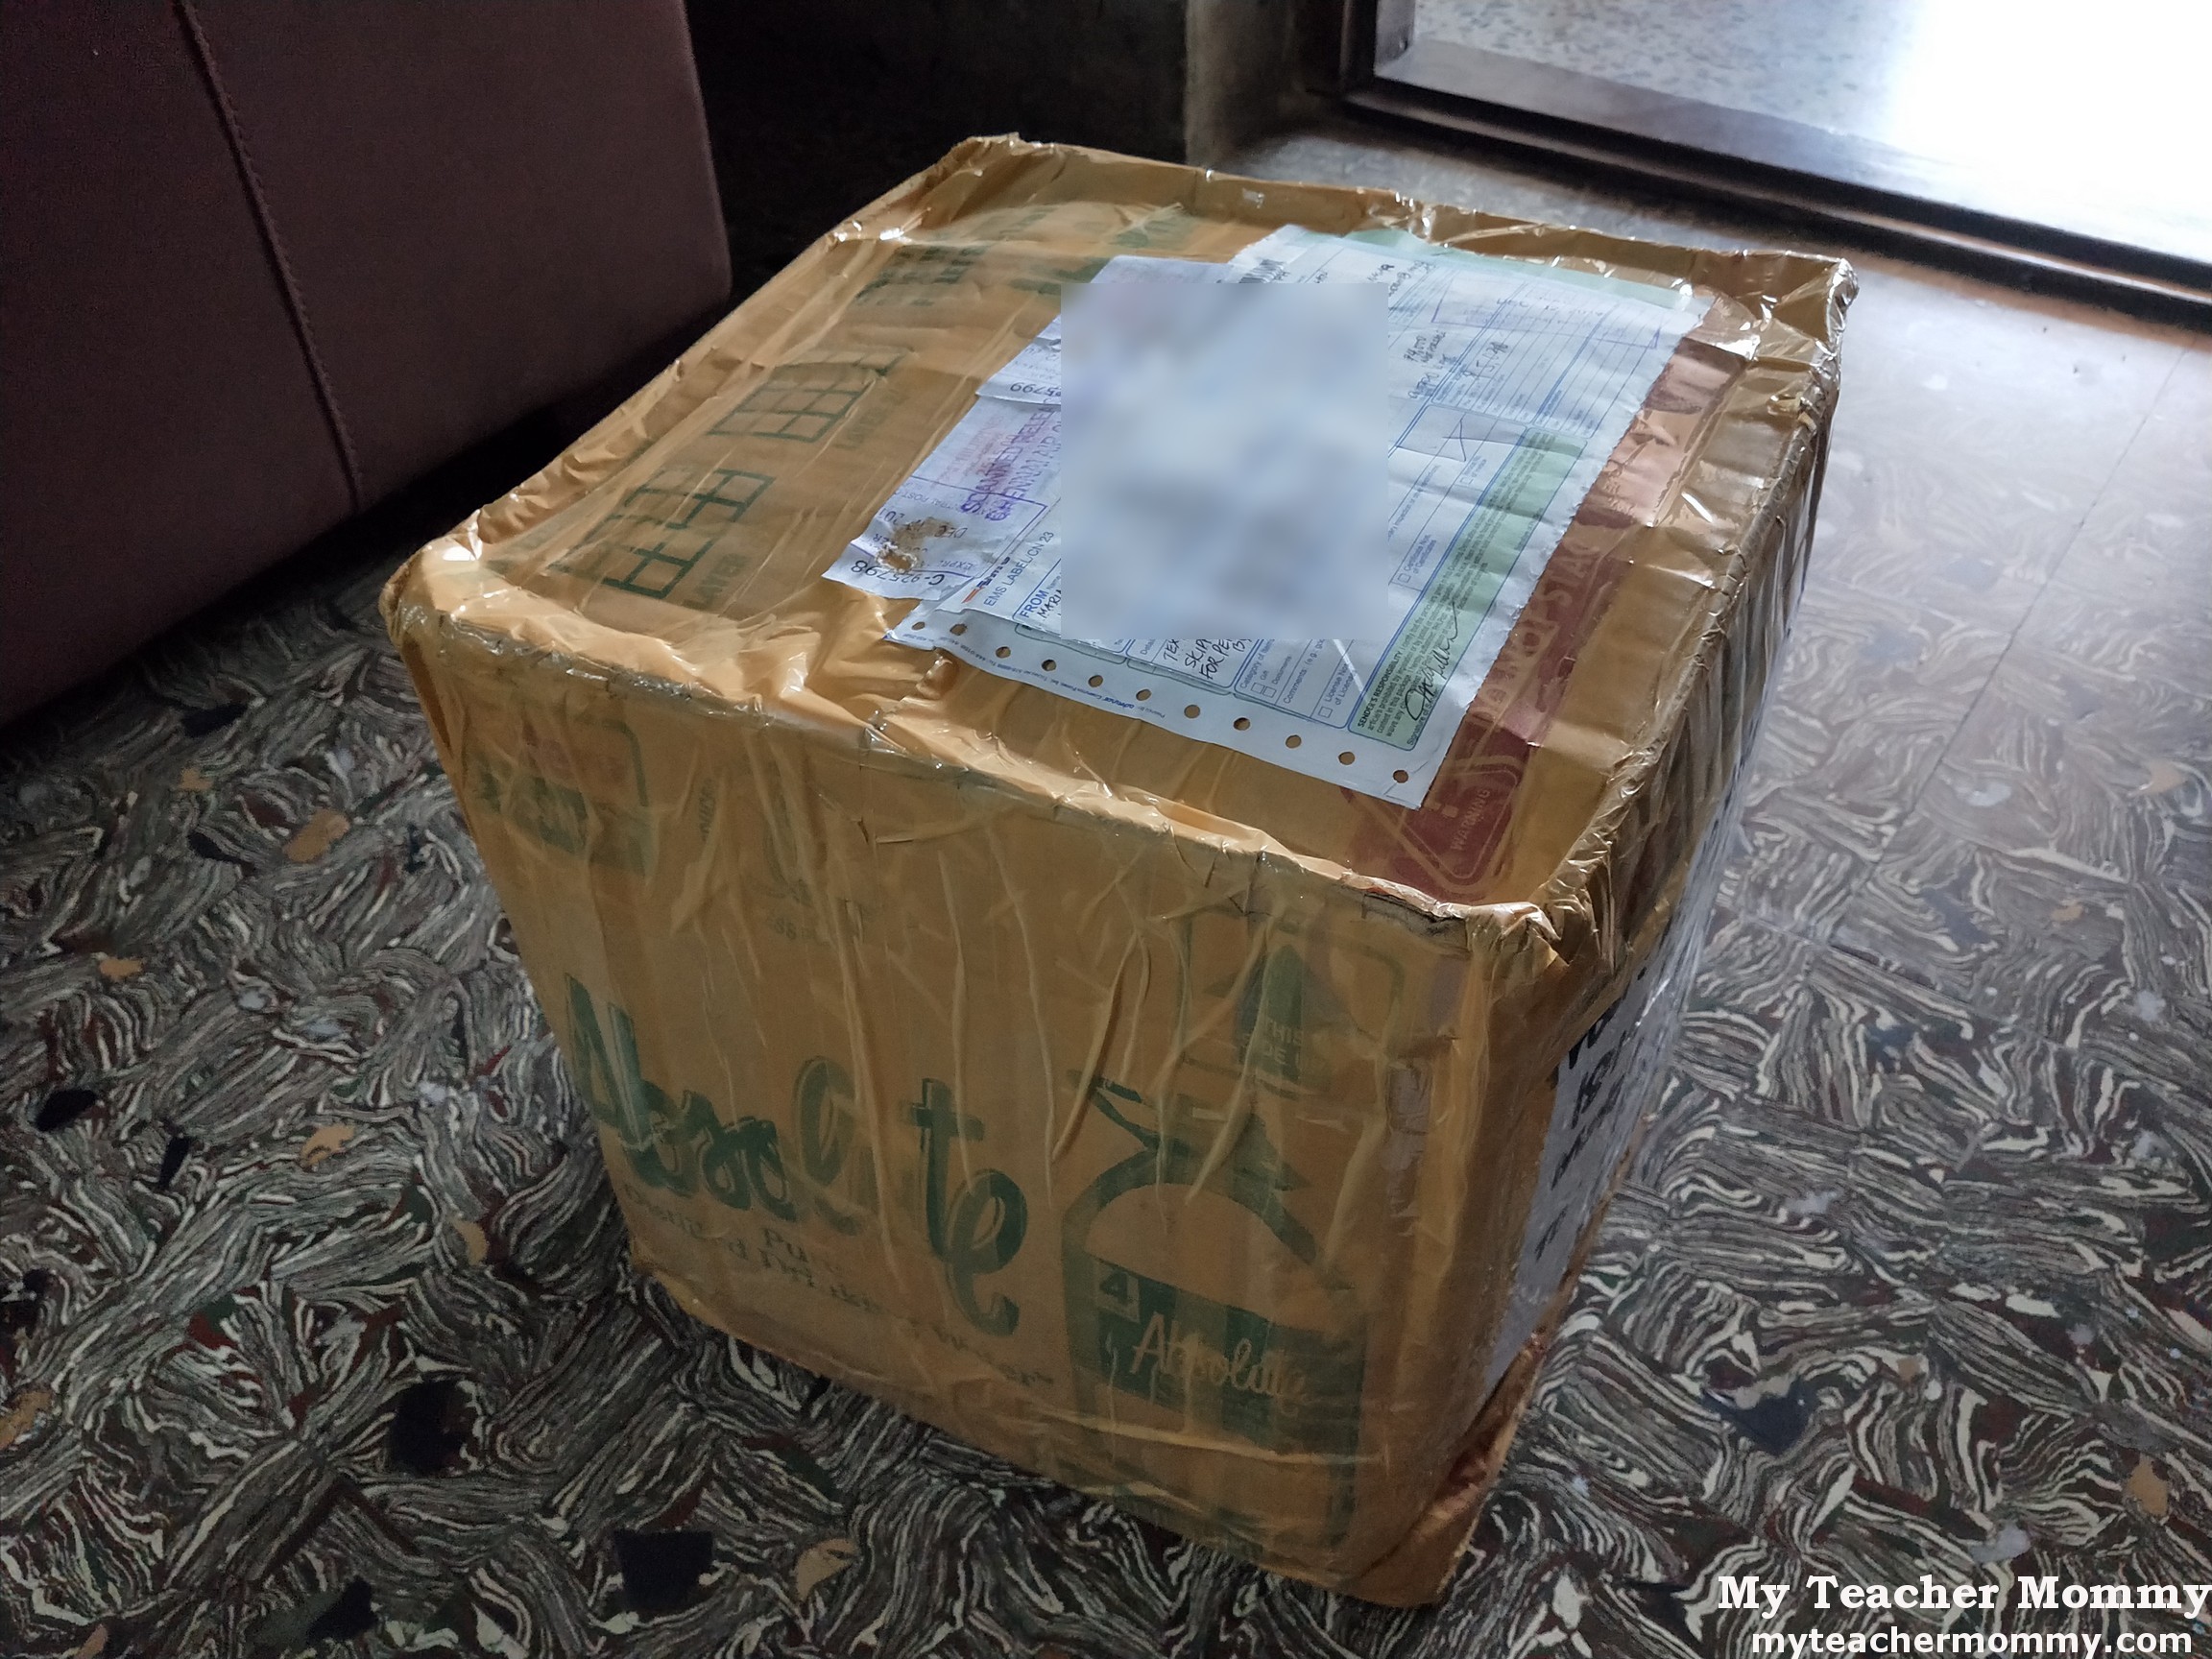 My second parcel makes it to Chennai, India, unscathed.